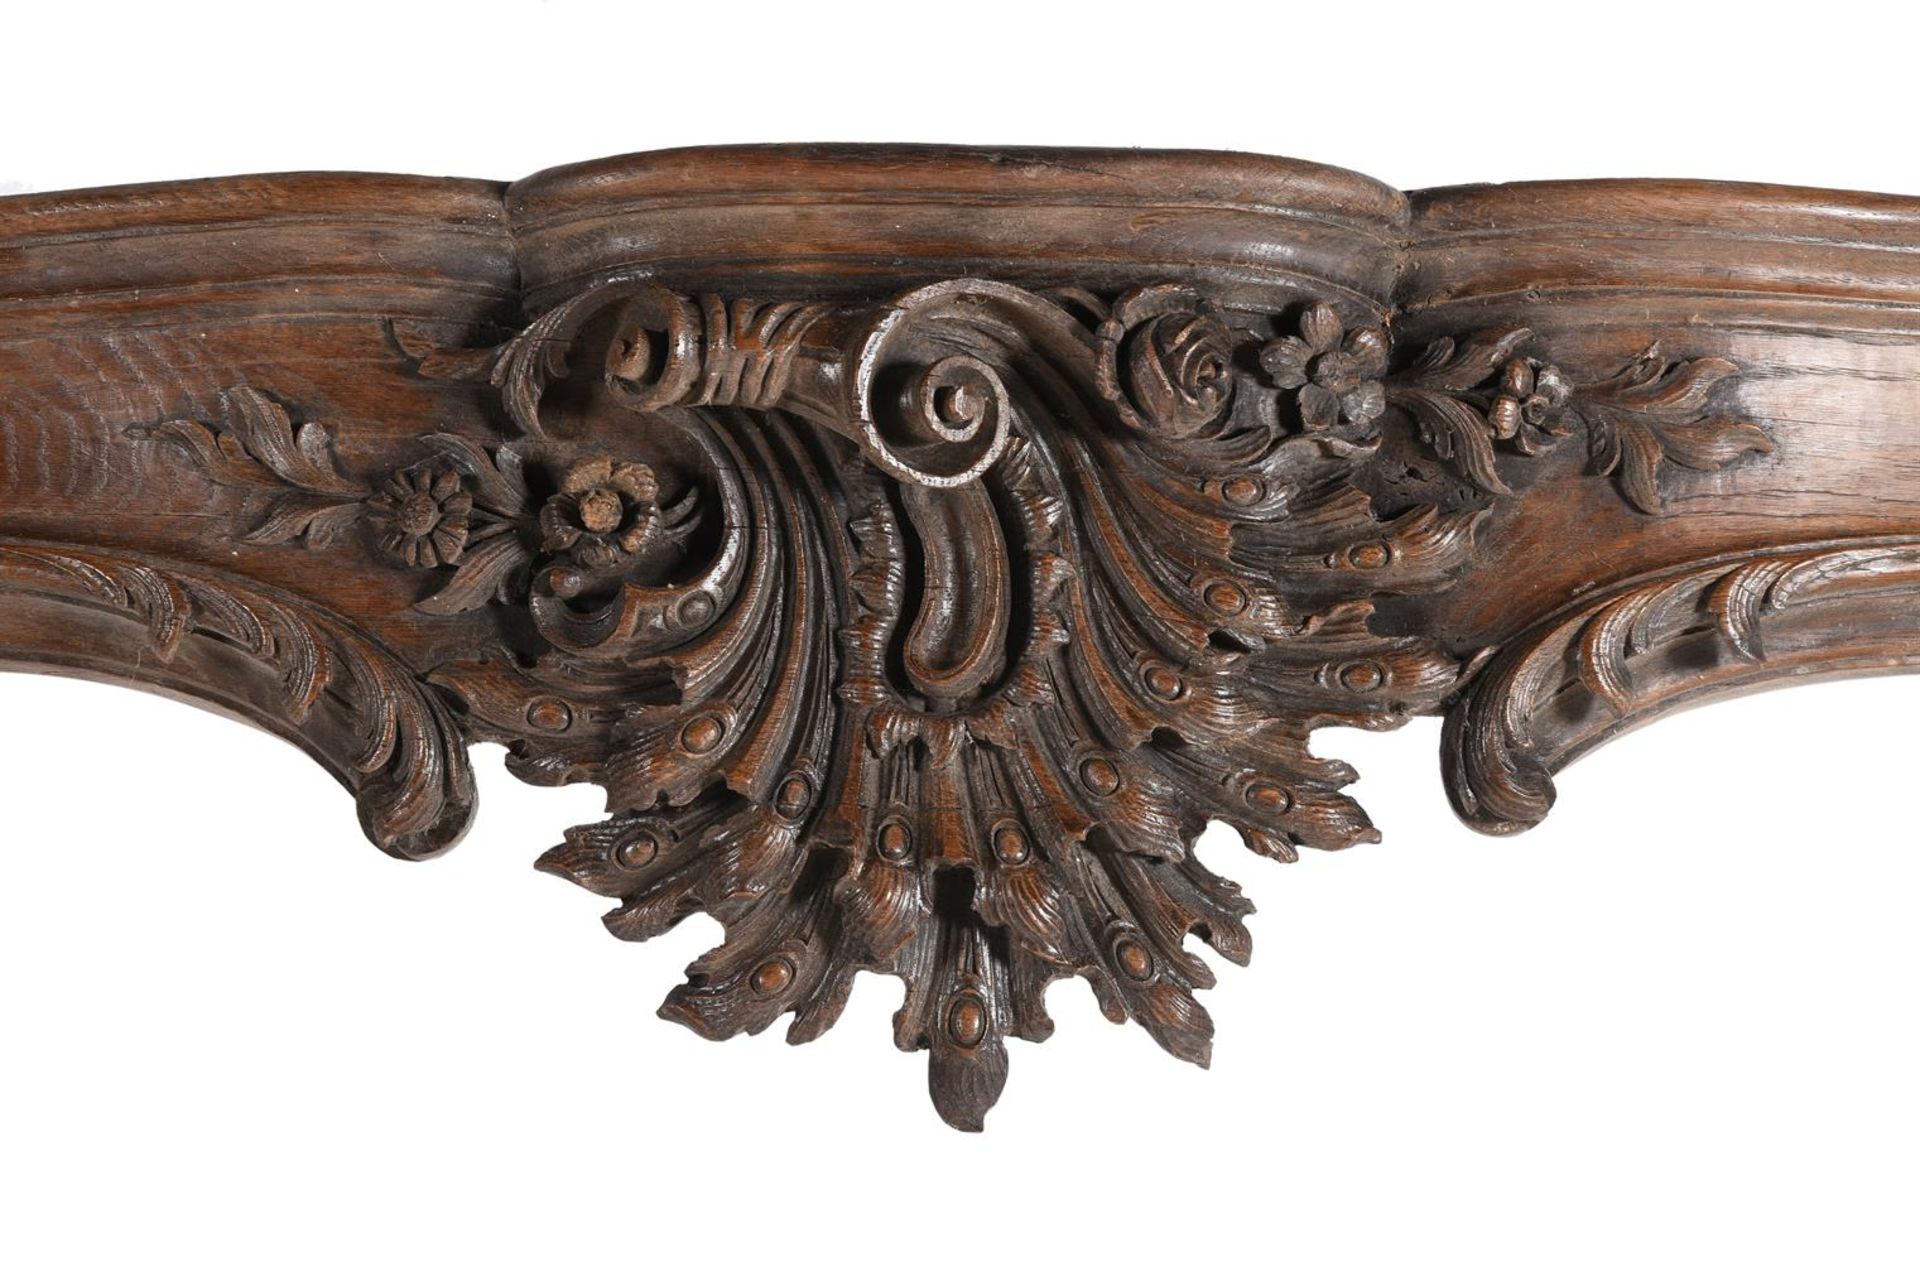 A LARGE FLEMISH OAK CARVED FIRE SURROUND, 18TH OR 19TH CENTURY - Image 2 of 2